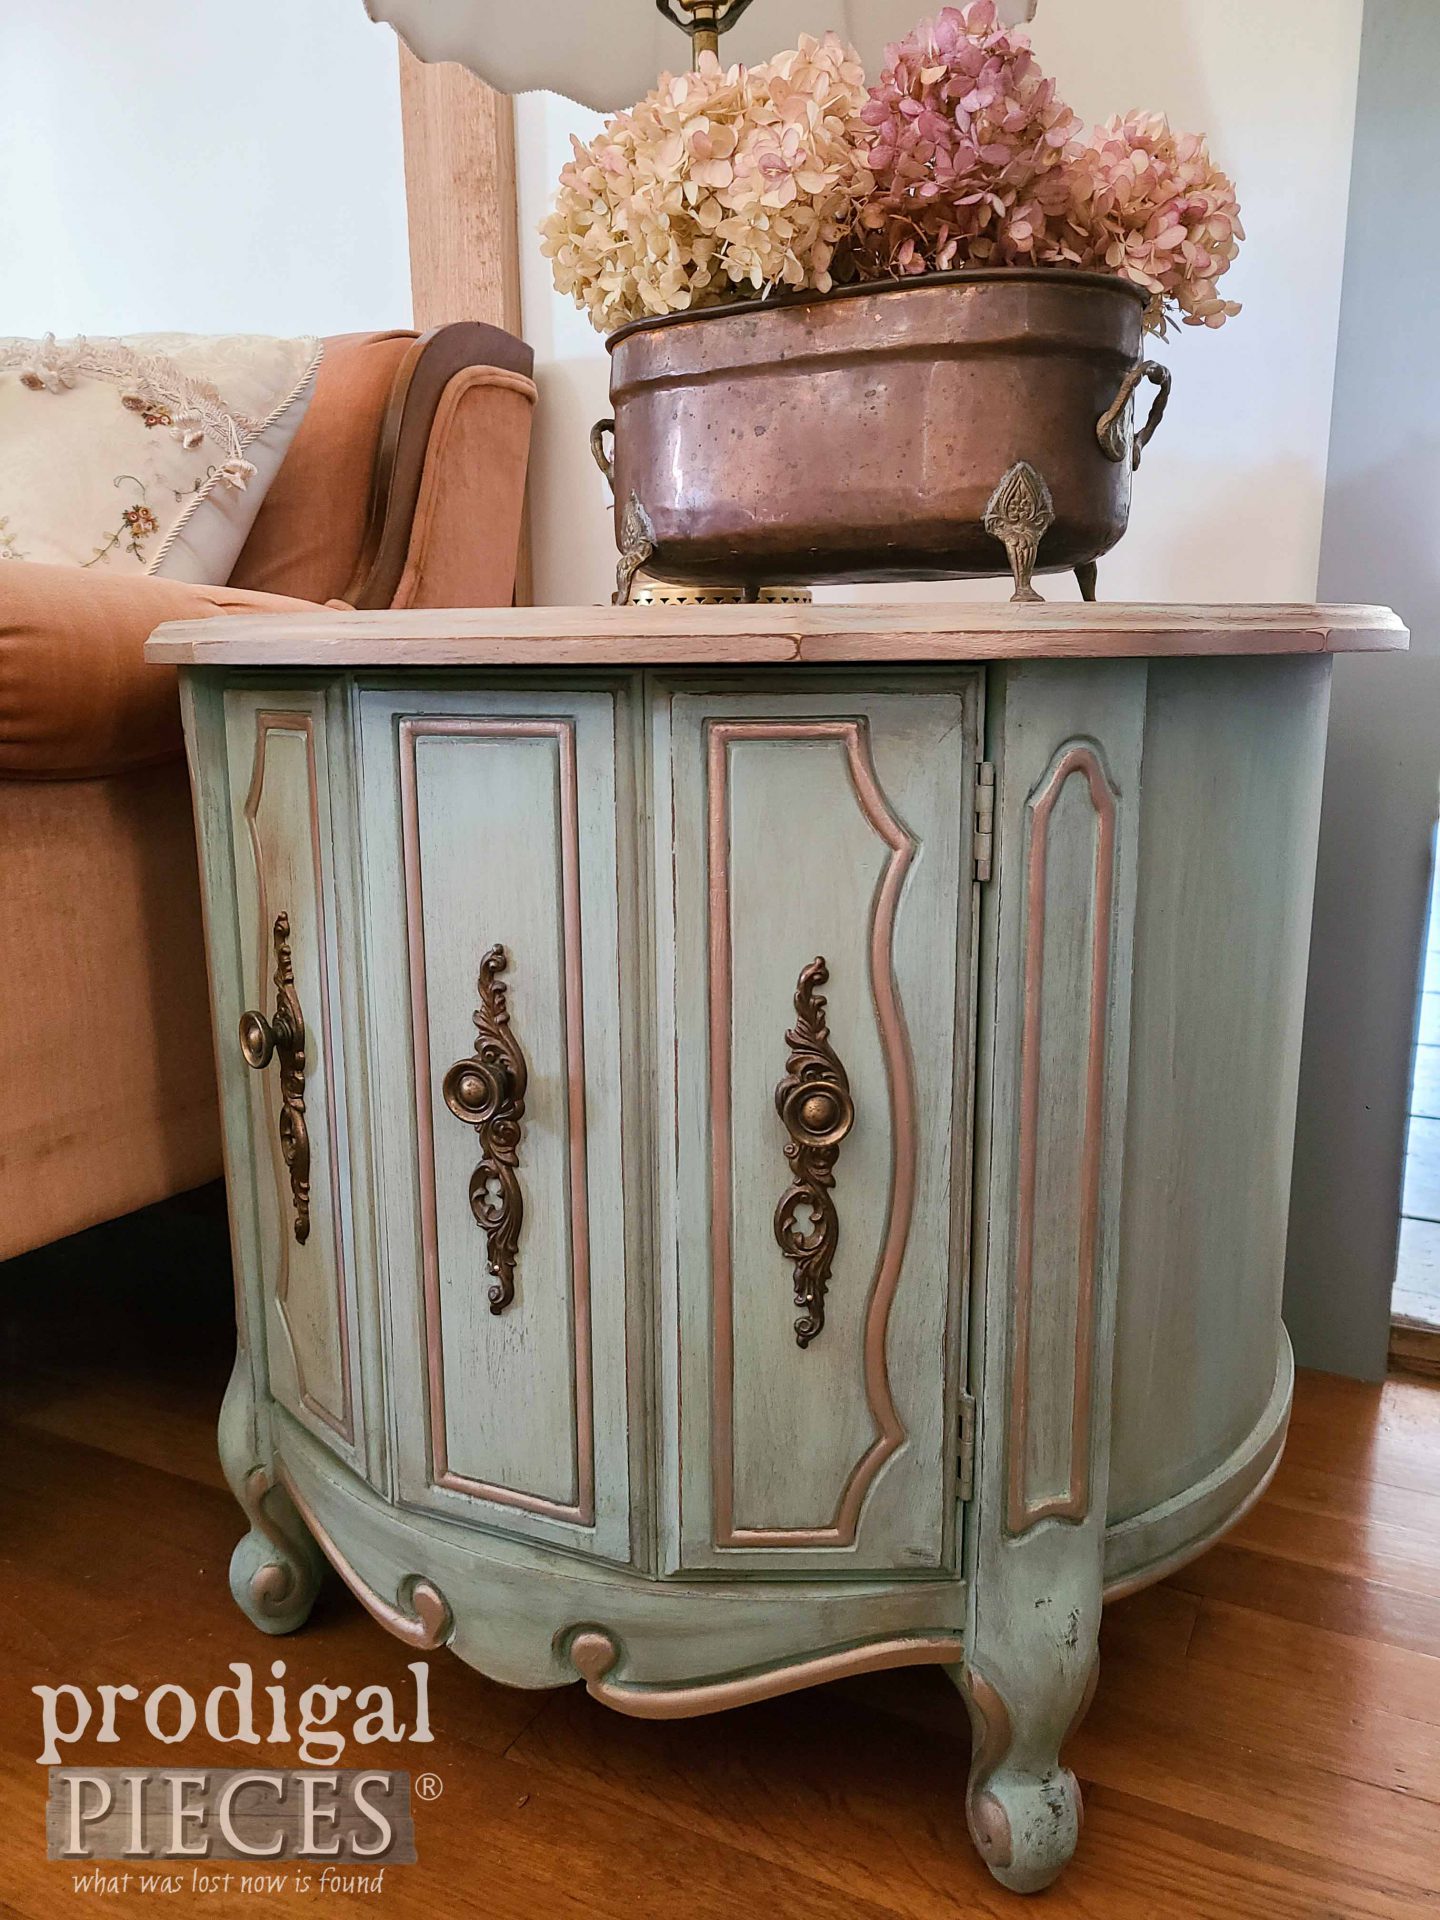 Vintage Mersman Side Table in French Provincial Design by Larissa of Prodigal Pieces | prodigalpieces.com #prodigalpieces #french #diy #home #furniture